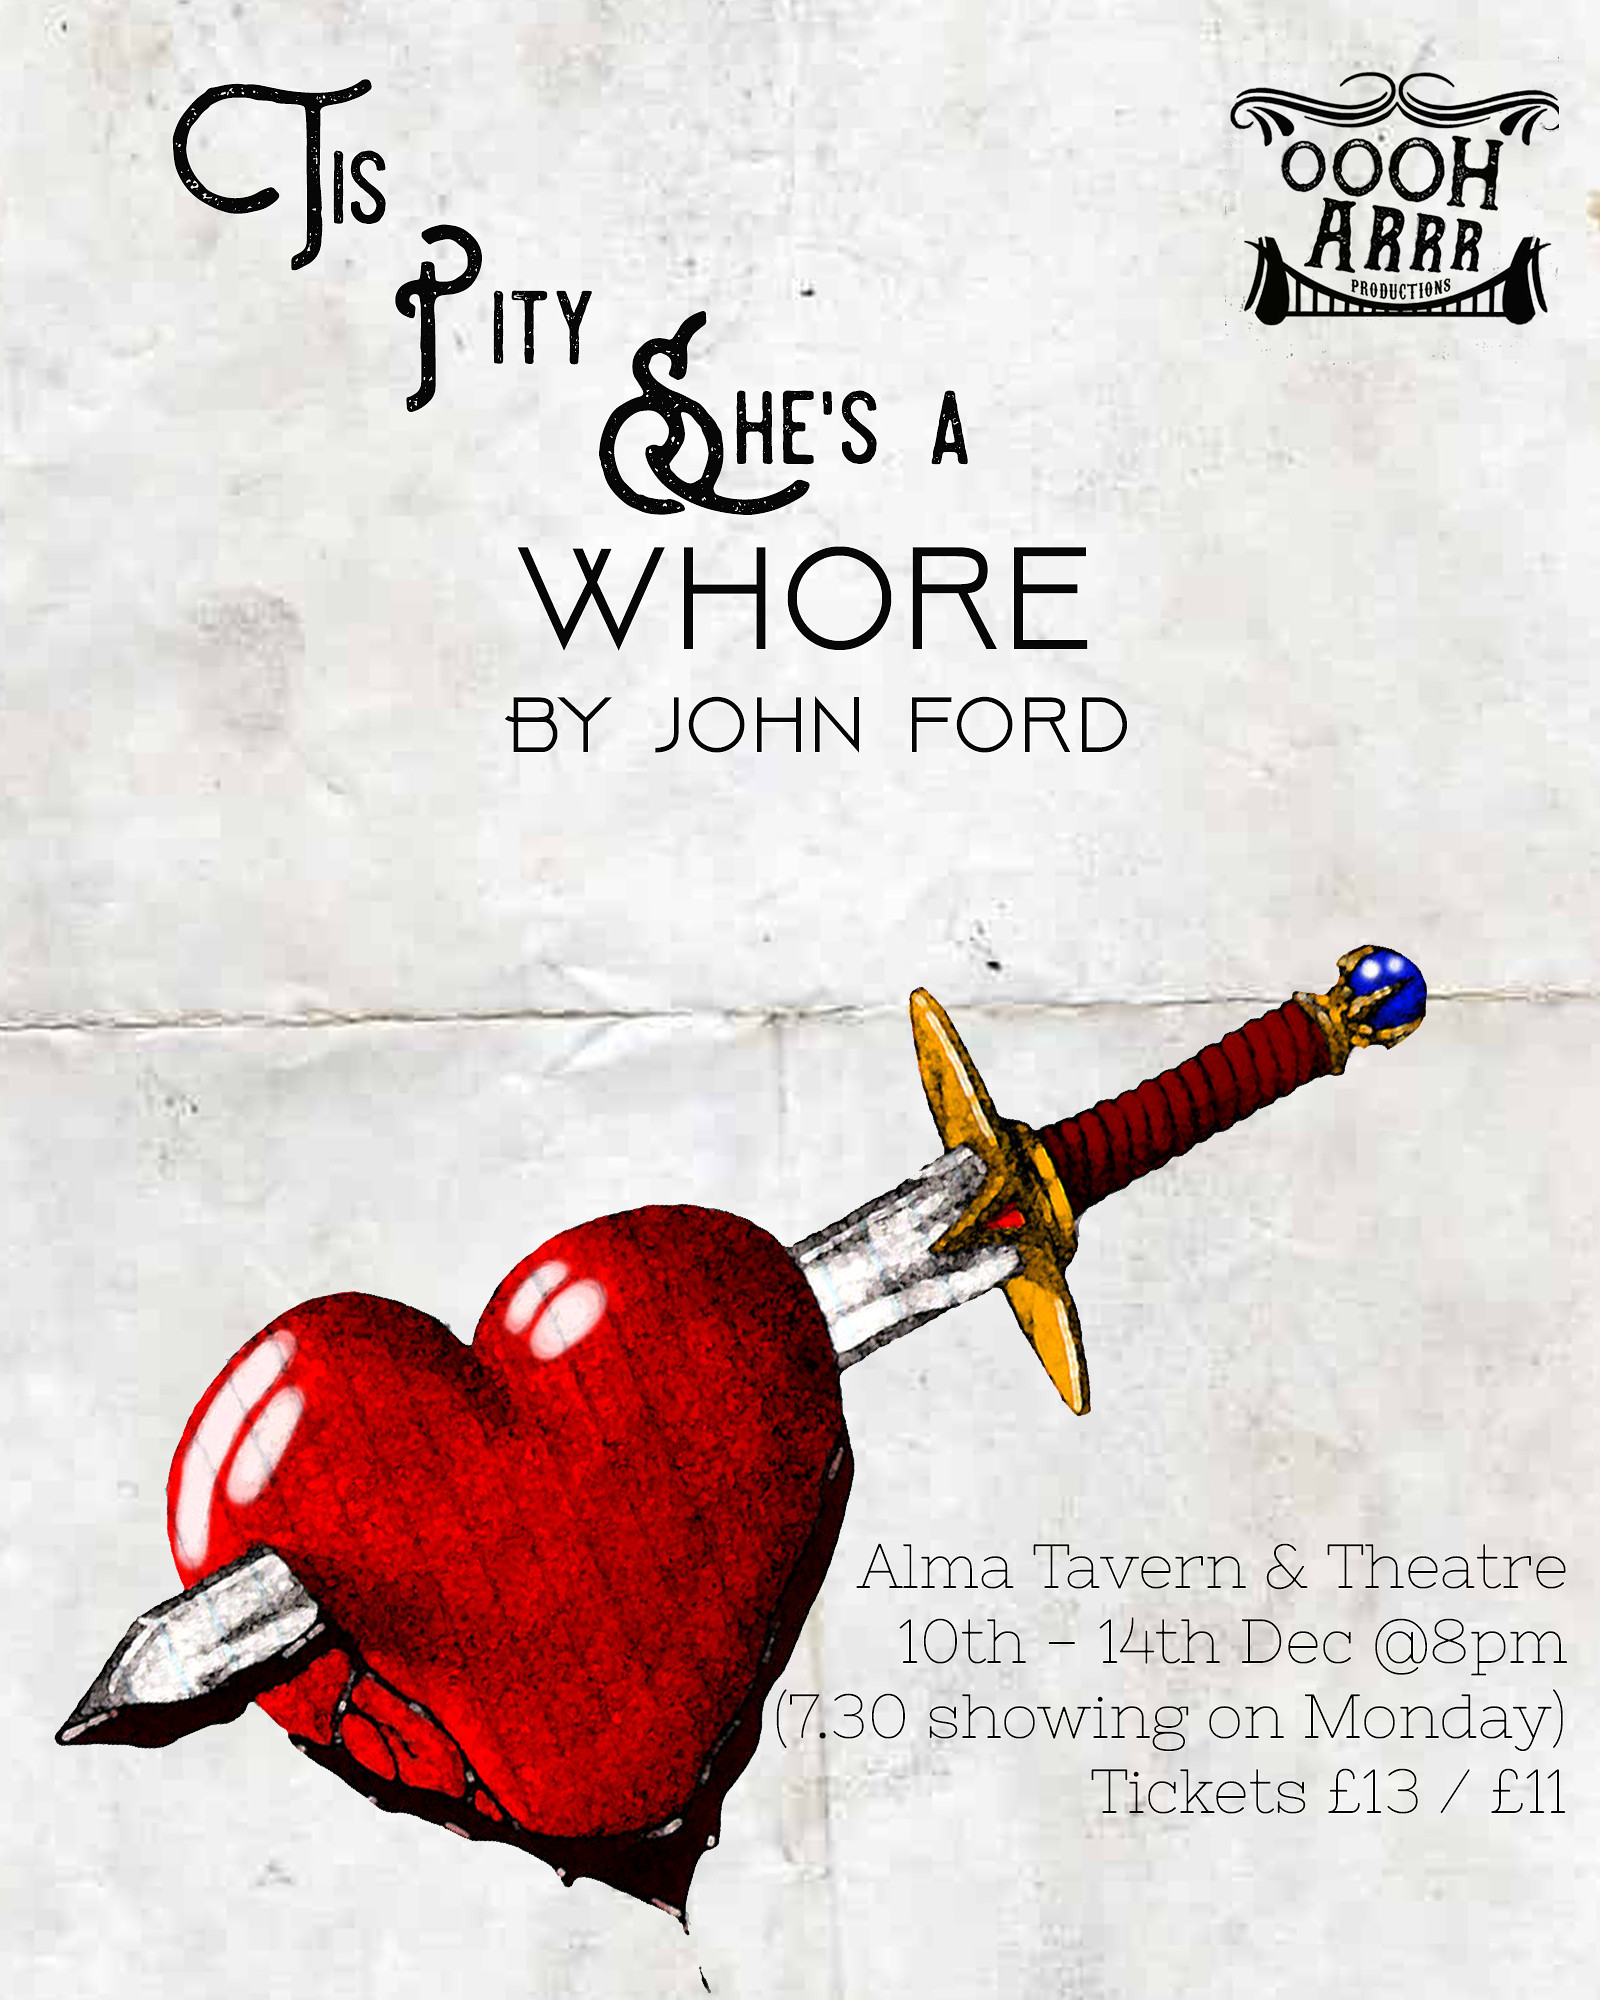 Tis Pity She's a Whore at Alma Tavern and Theatre